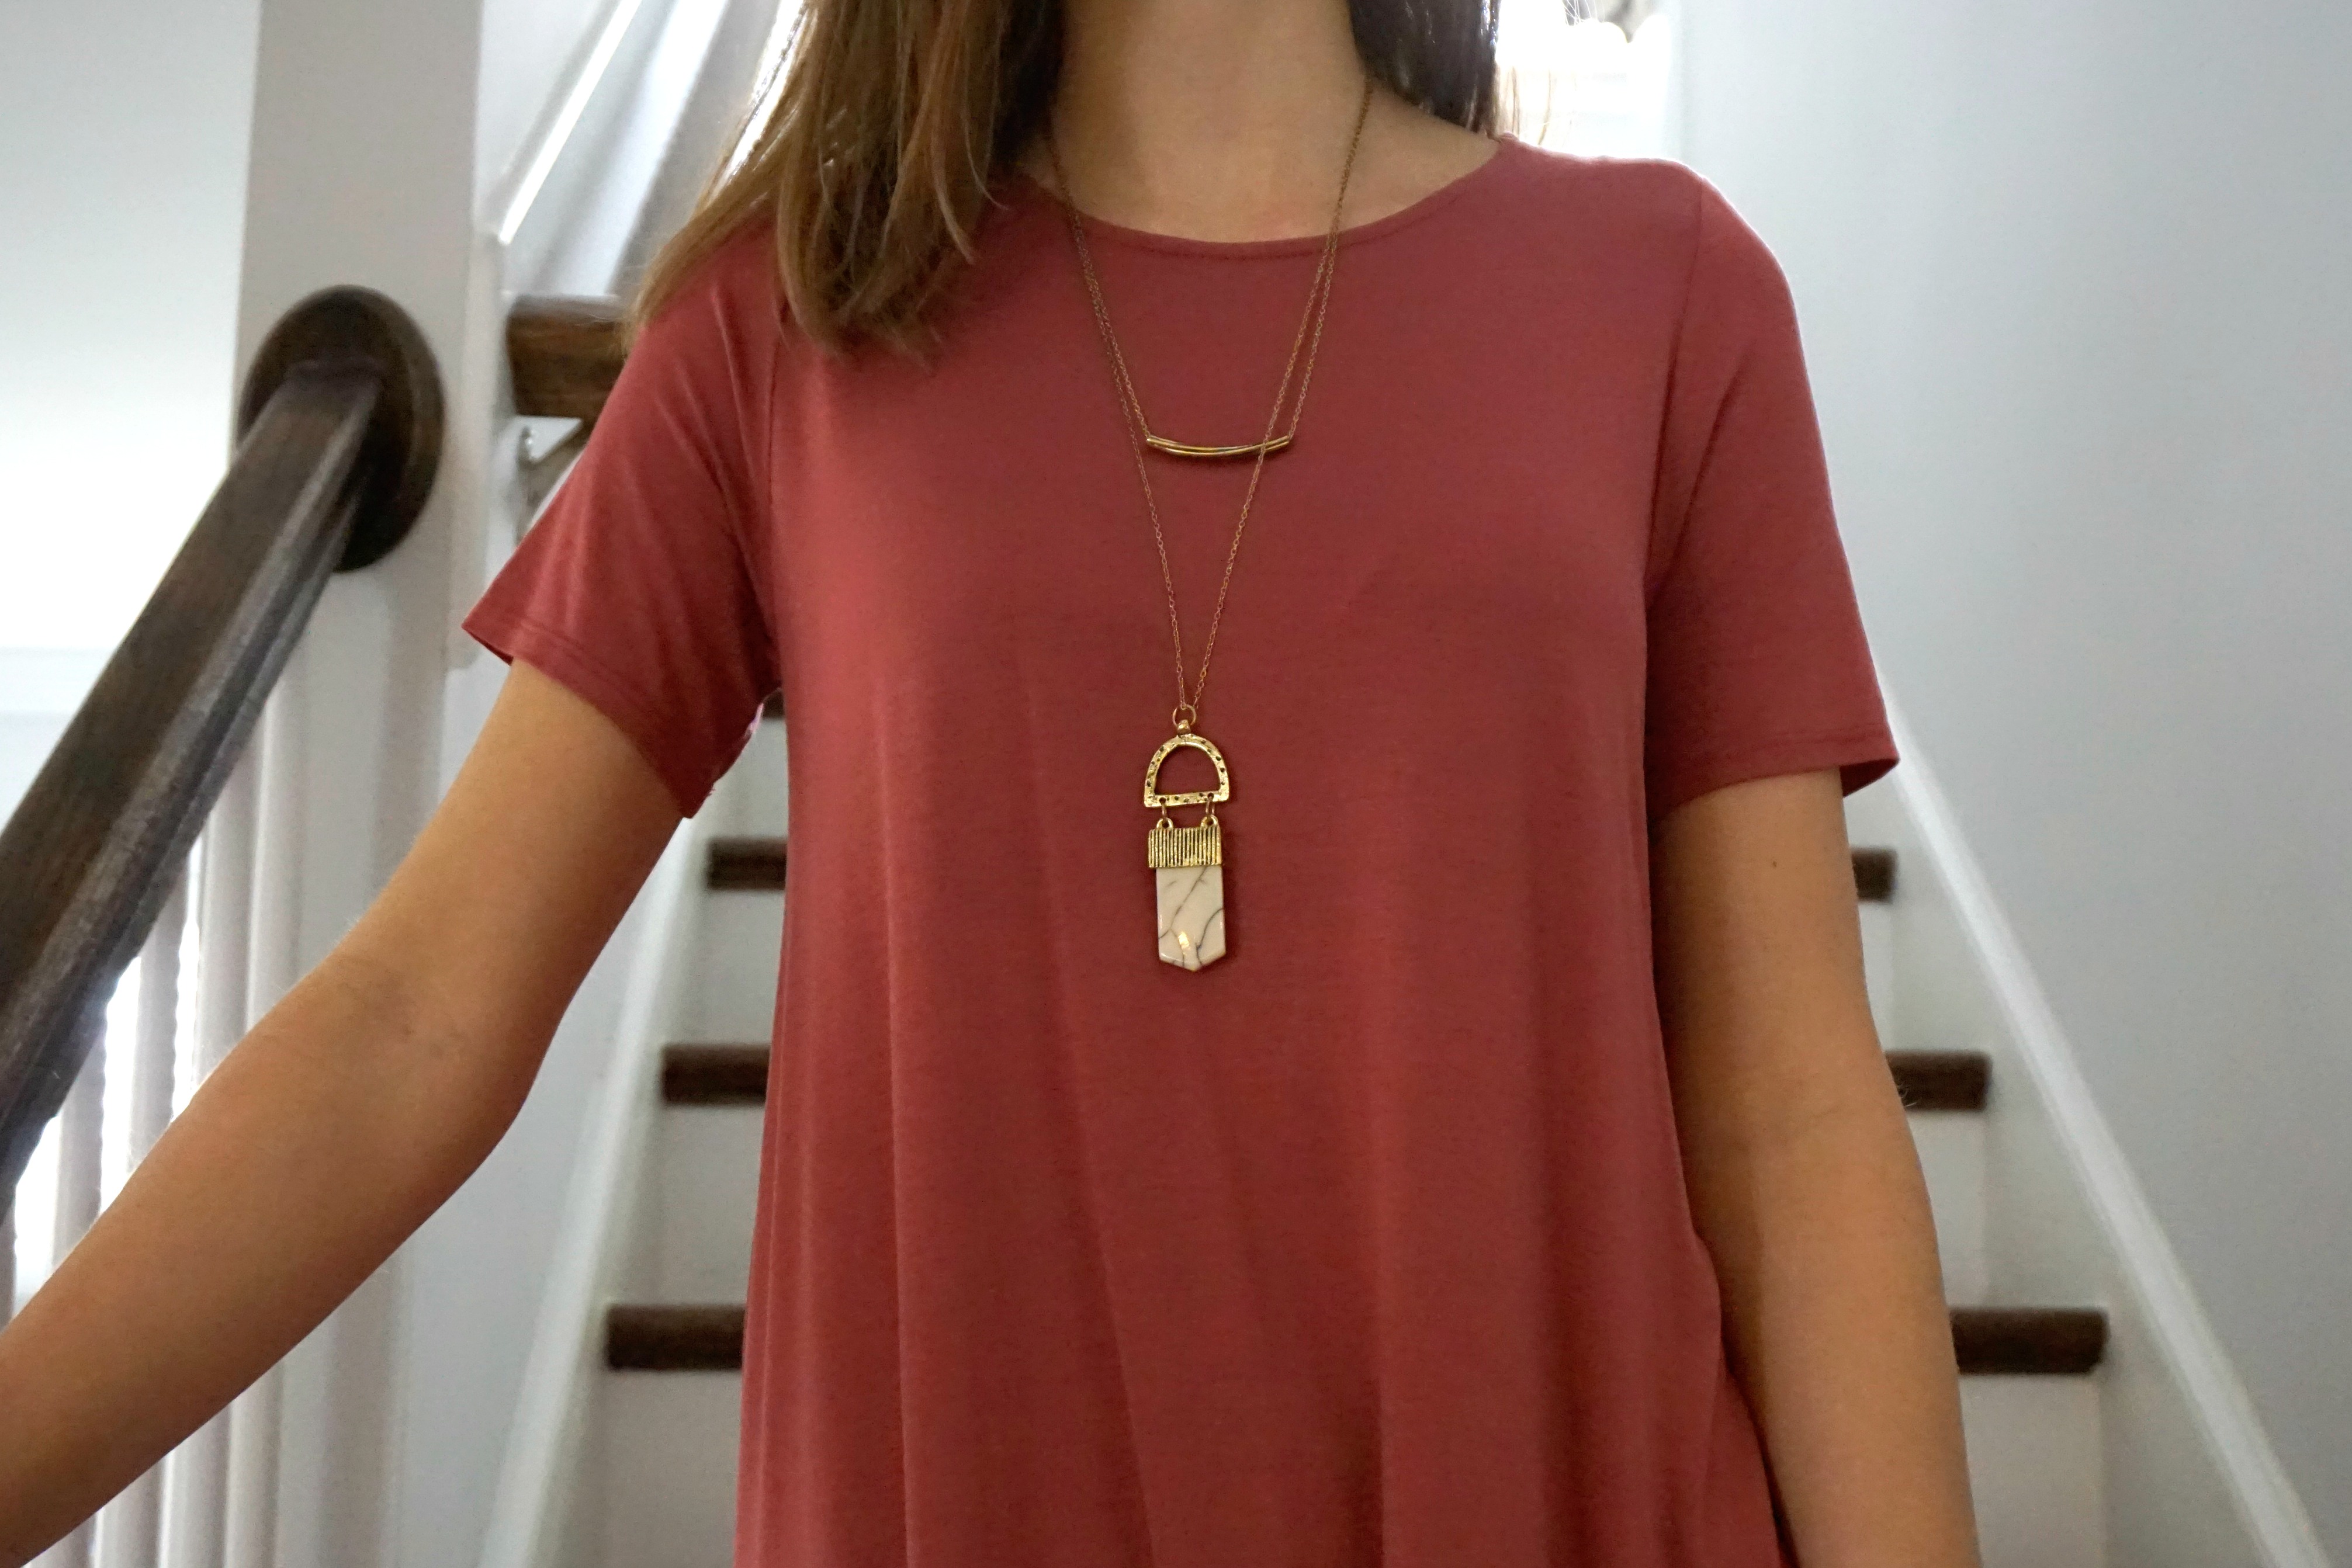 Layered amulet necklace made by fair trade artisan co-op in India | Fairly Southern